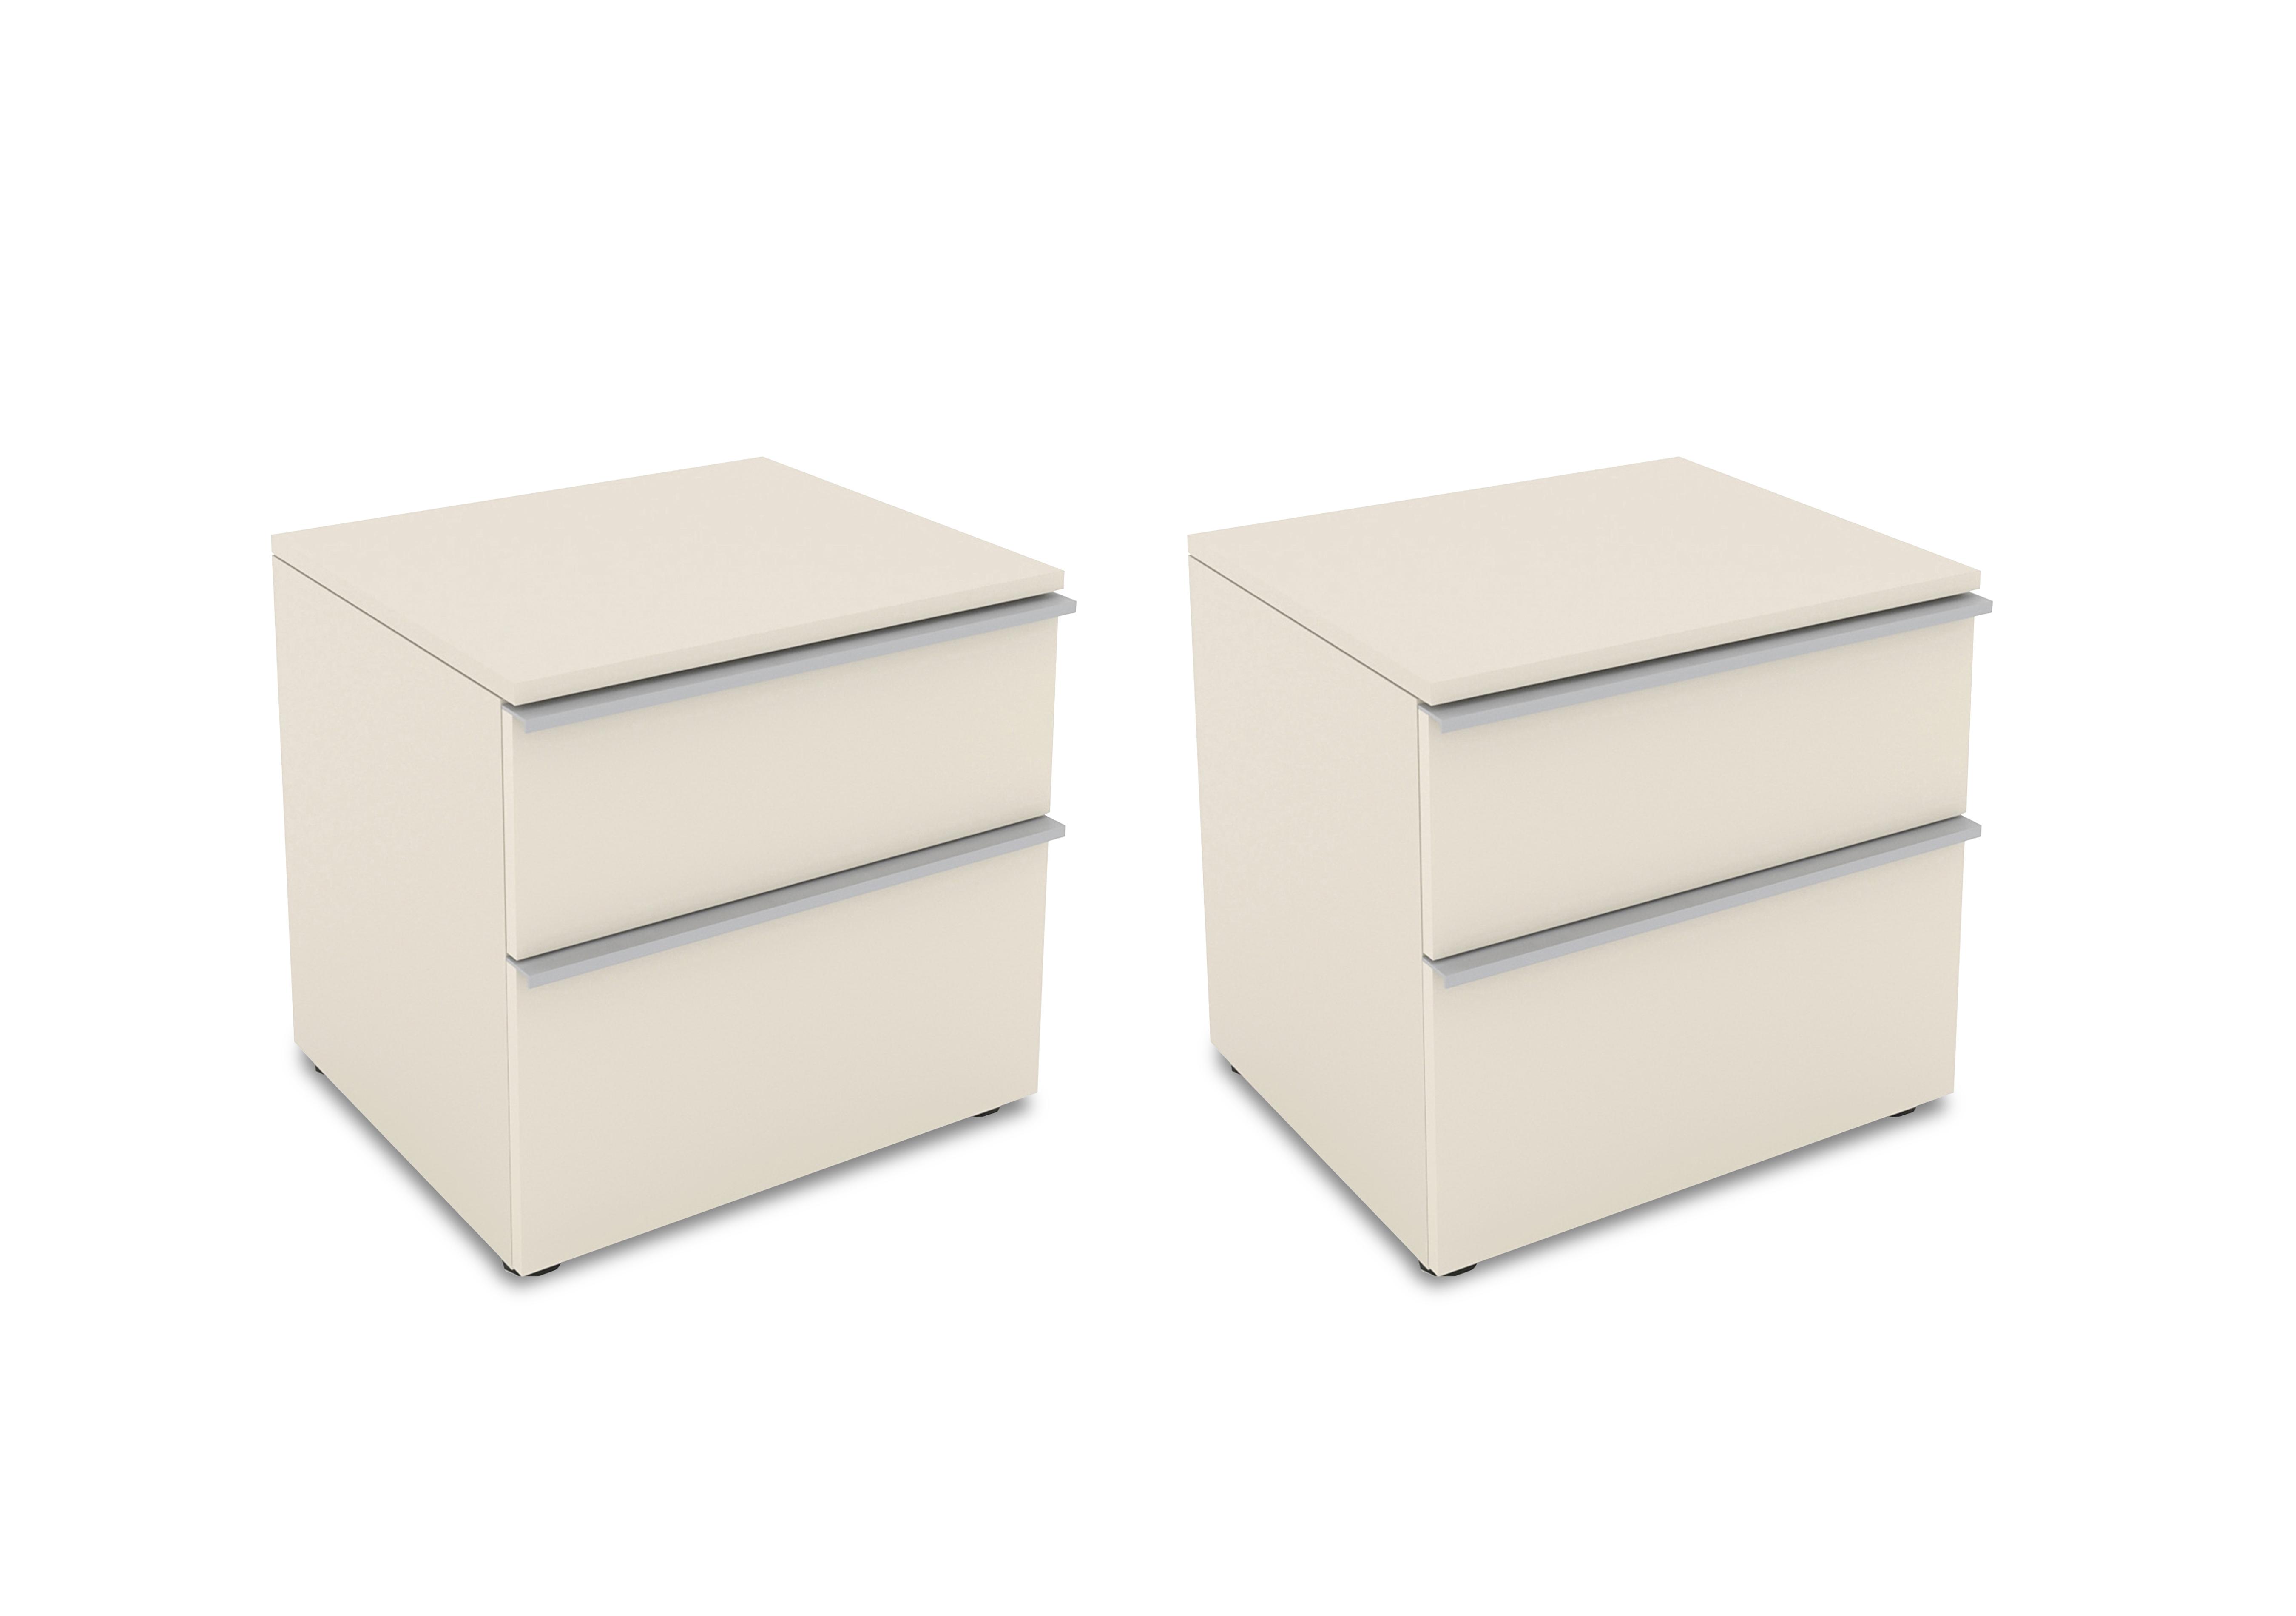 Cora Pair of 2 Drawer Bedside Cabinets in Perla on Furniture Village